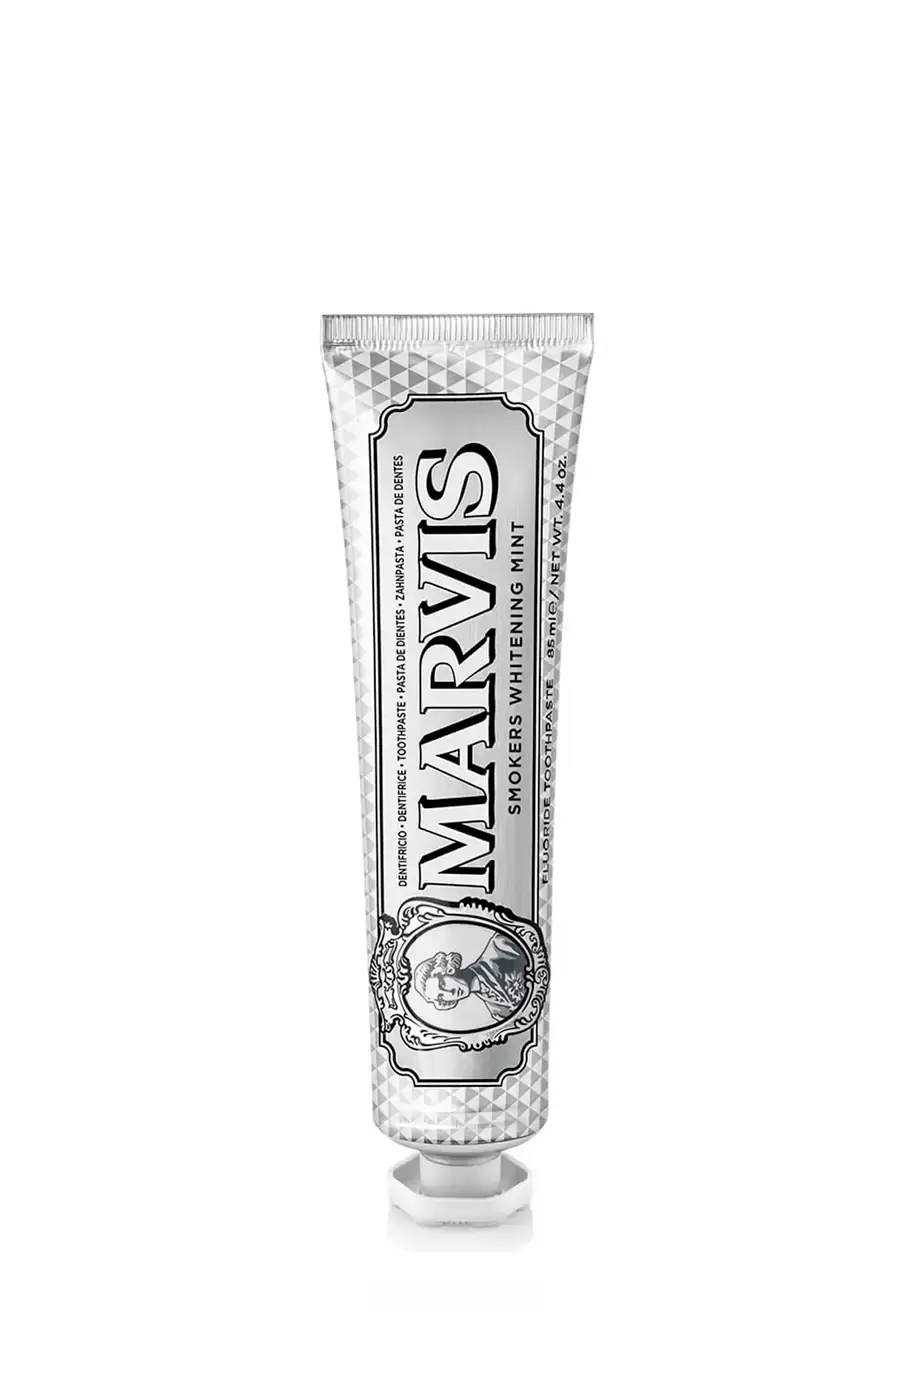 Marvis Toothpaste Smokers Whitening Mint